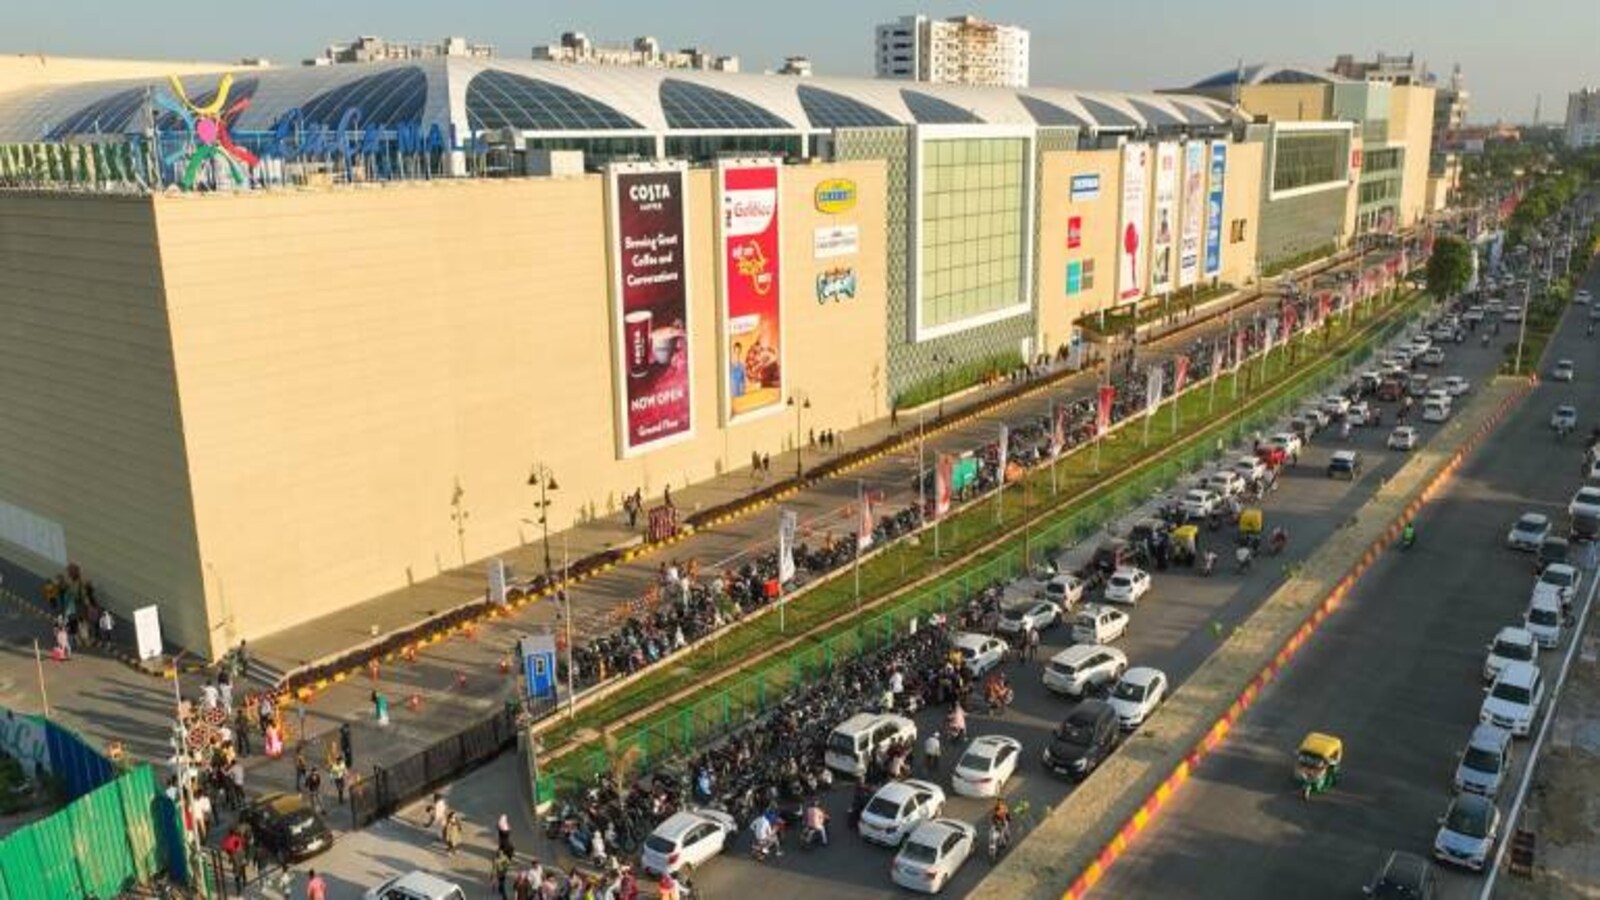 LULU MALL HYDERABAD - All You Need to Know BEFORE You Go (with Photos)